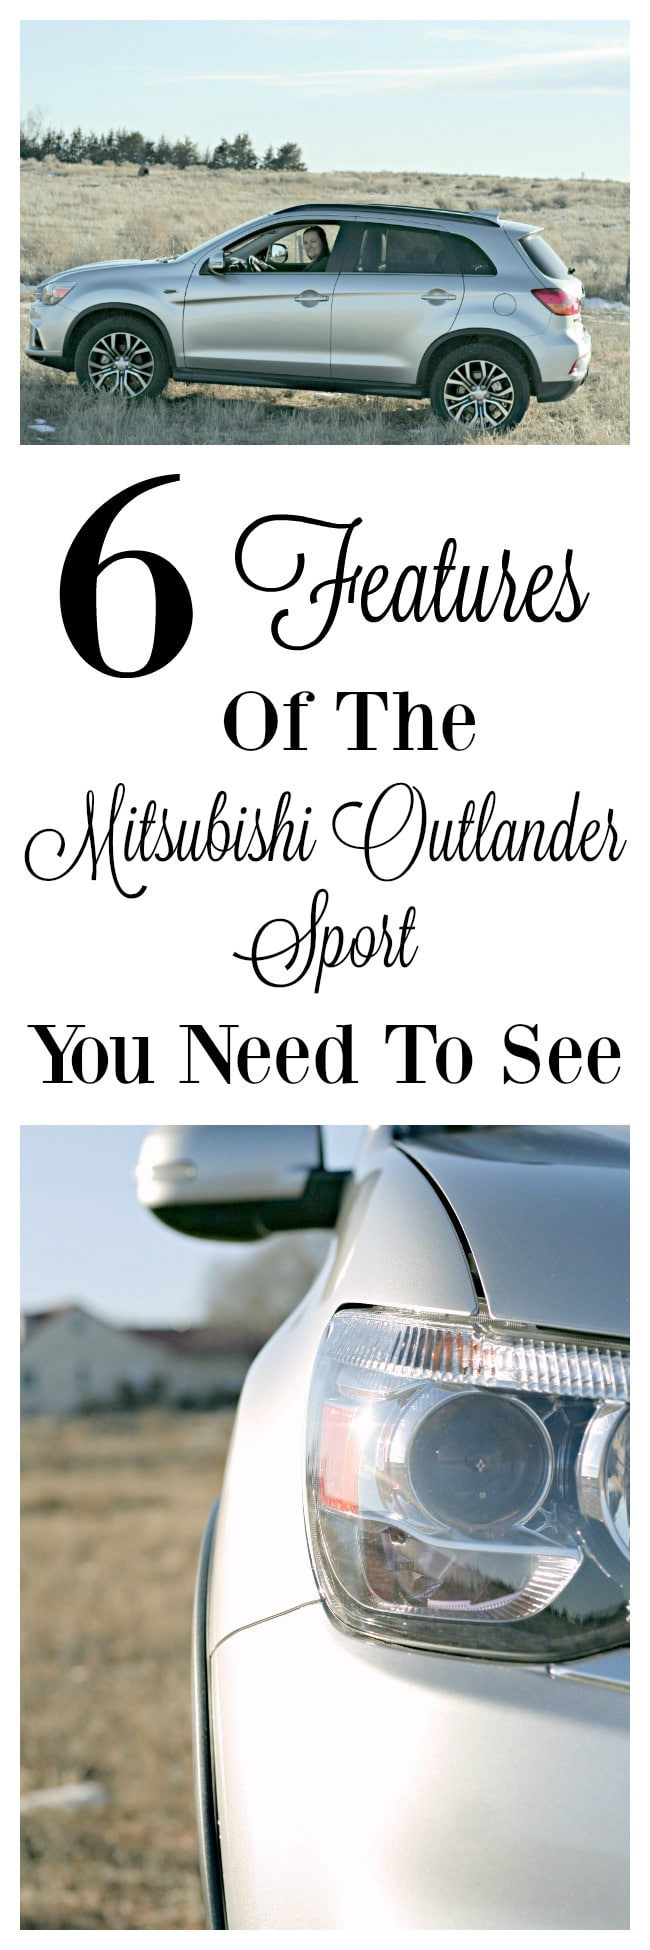 Features of Mitsubishi Outlander Sport, cool features of the Mitsubishi Outlander, Why should I purchase the Mitsubishi Outlander, Mitsubishi Outlander Sport Specs